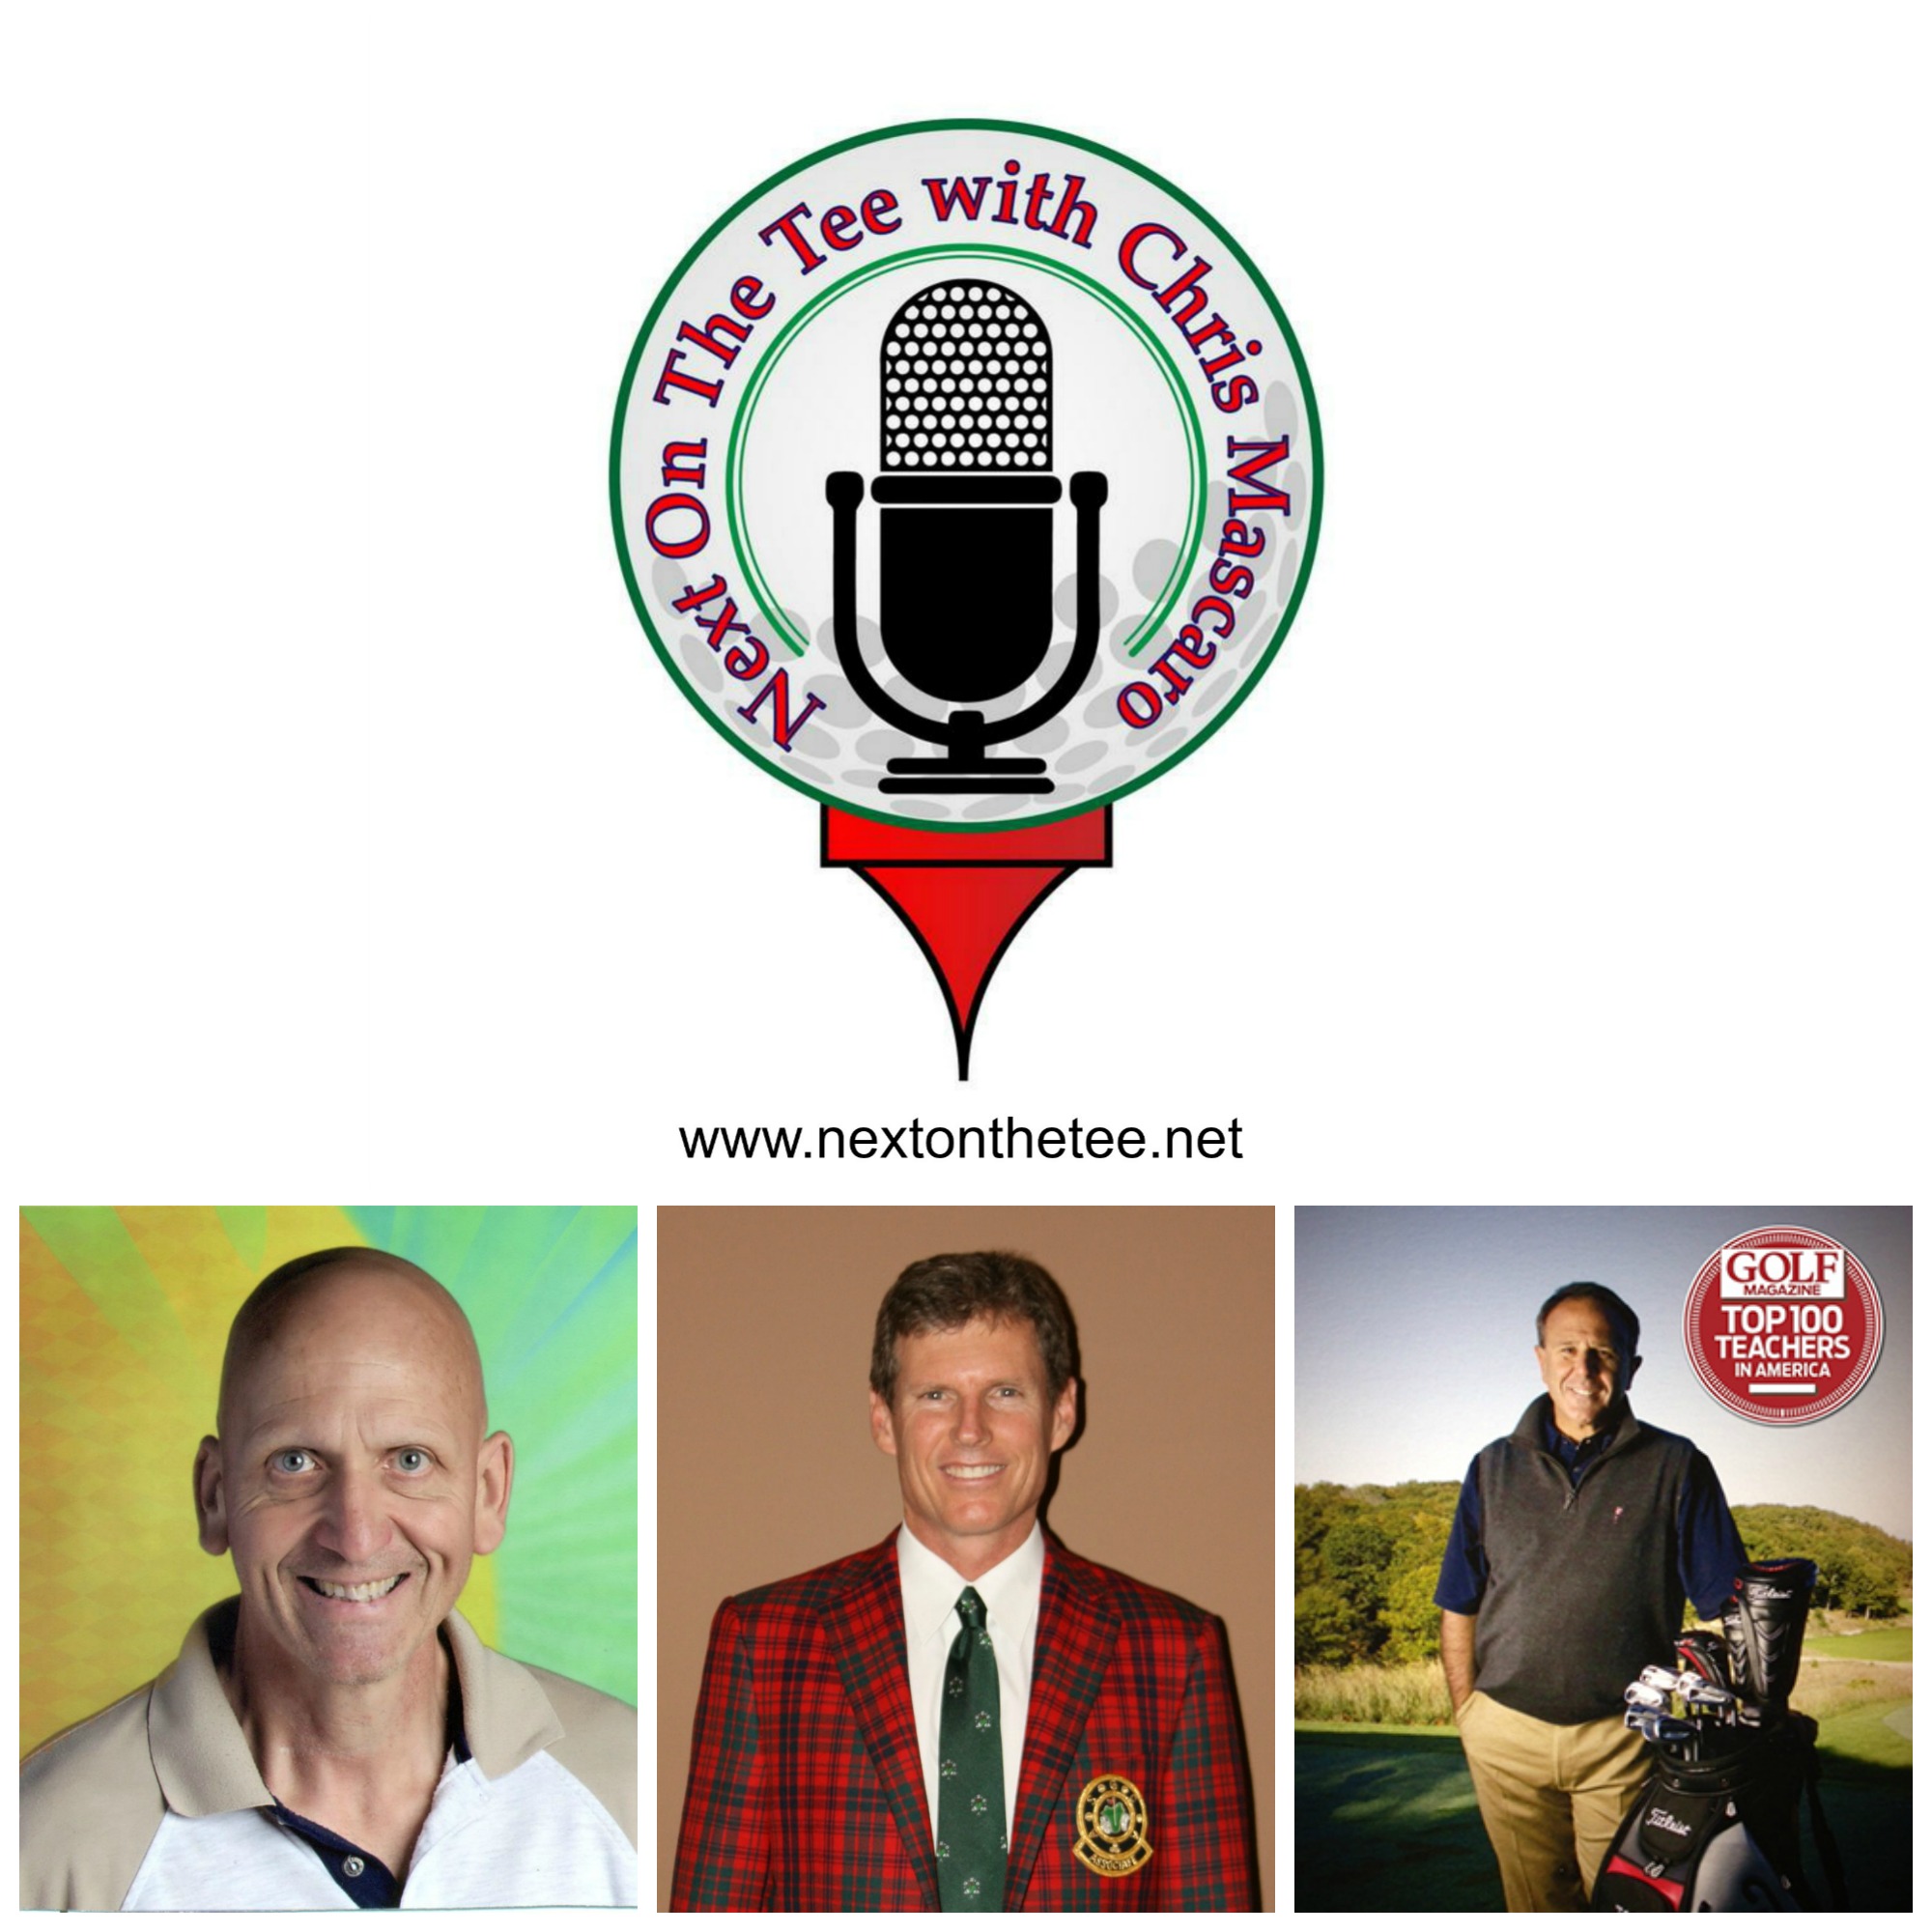 TNT Co-Host Bob Lazzari, Renowned Golf Course Designer Bill Bergin & Top 100 Instructor Tom Patri talk Travelers Champion, course design & where the USGA keeps getting it wrong on Next on the Tee.